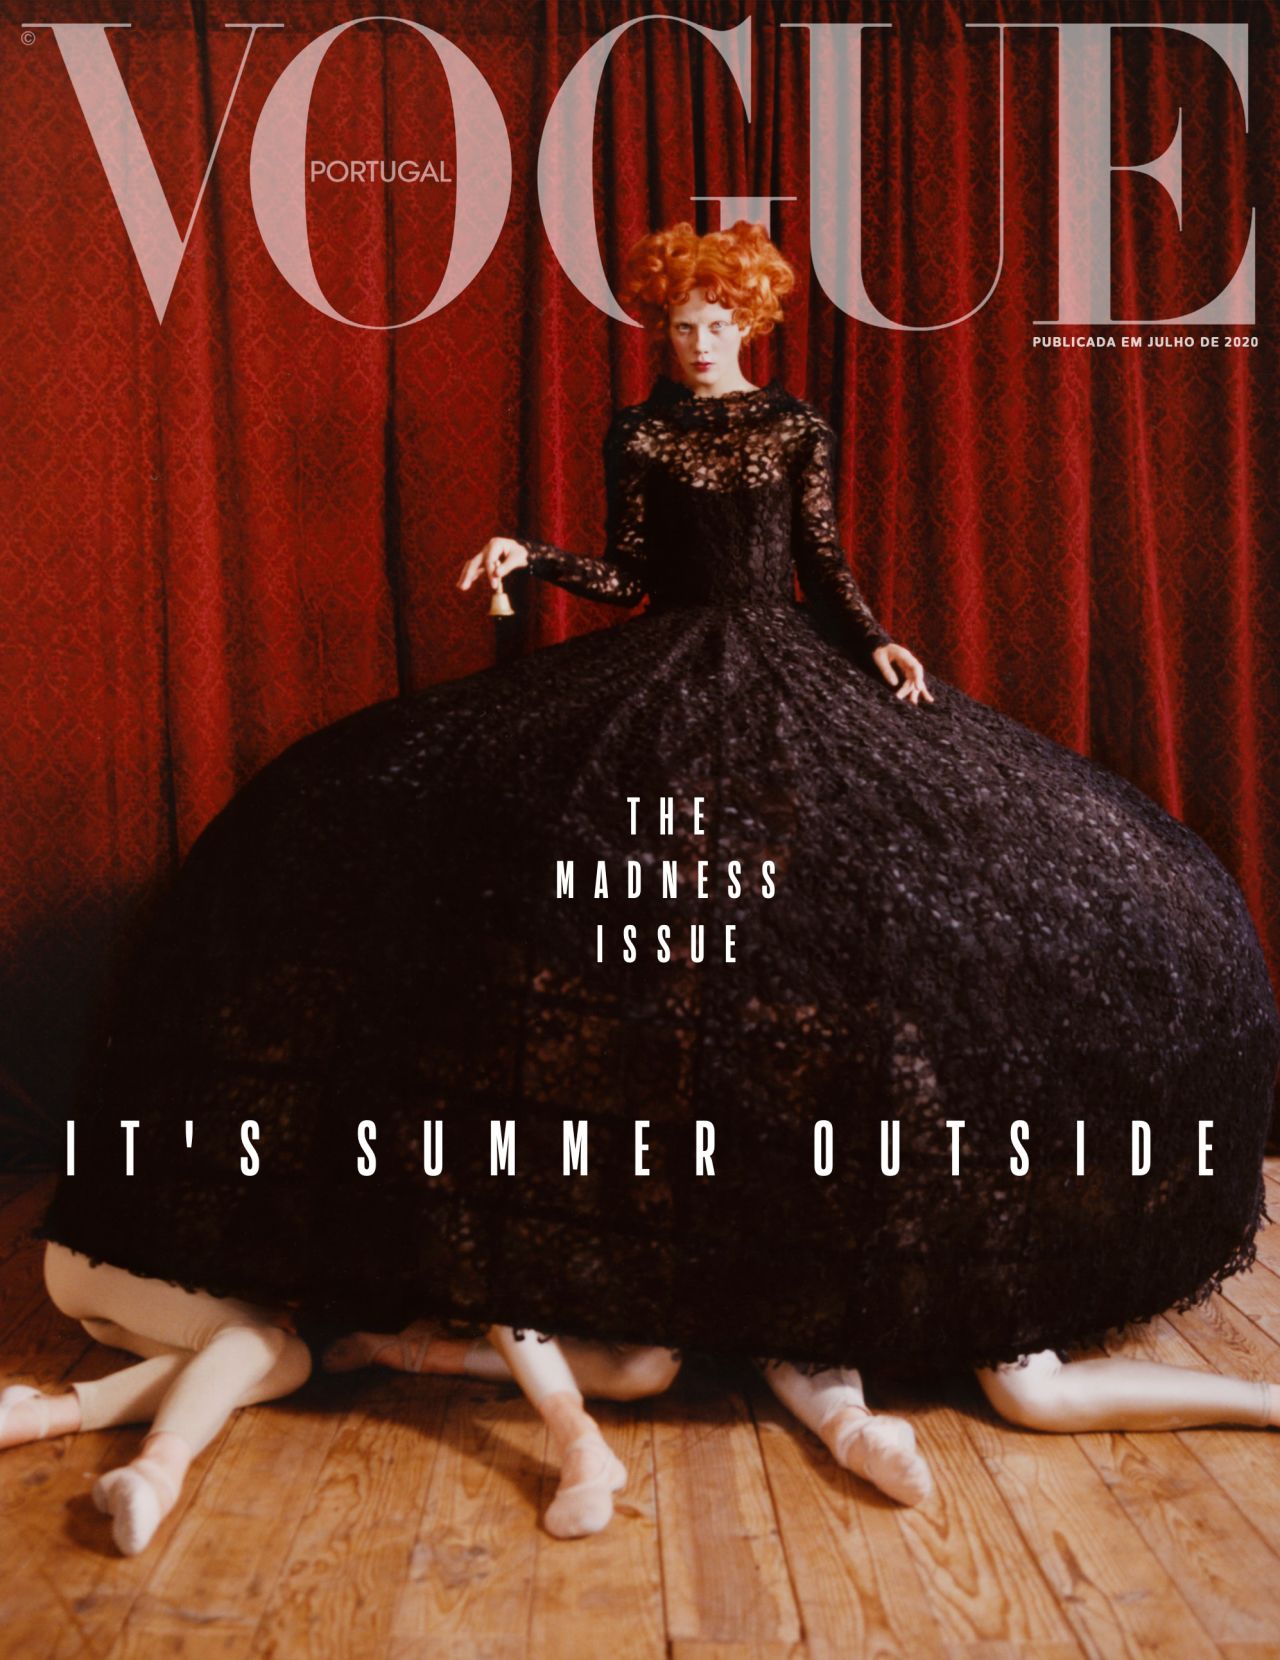 One of the covers from Vogue Portugal's "Madness" issue